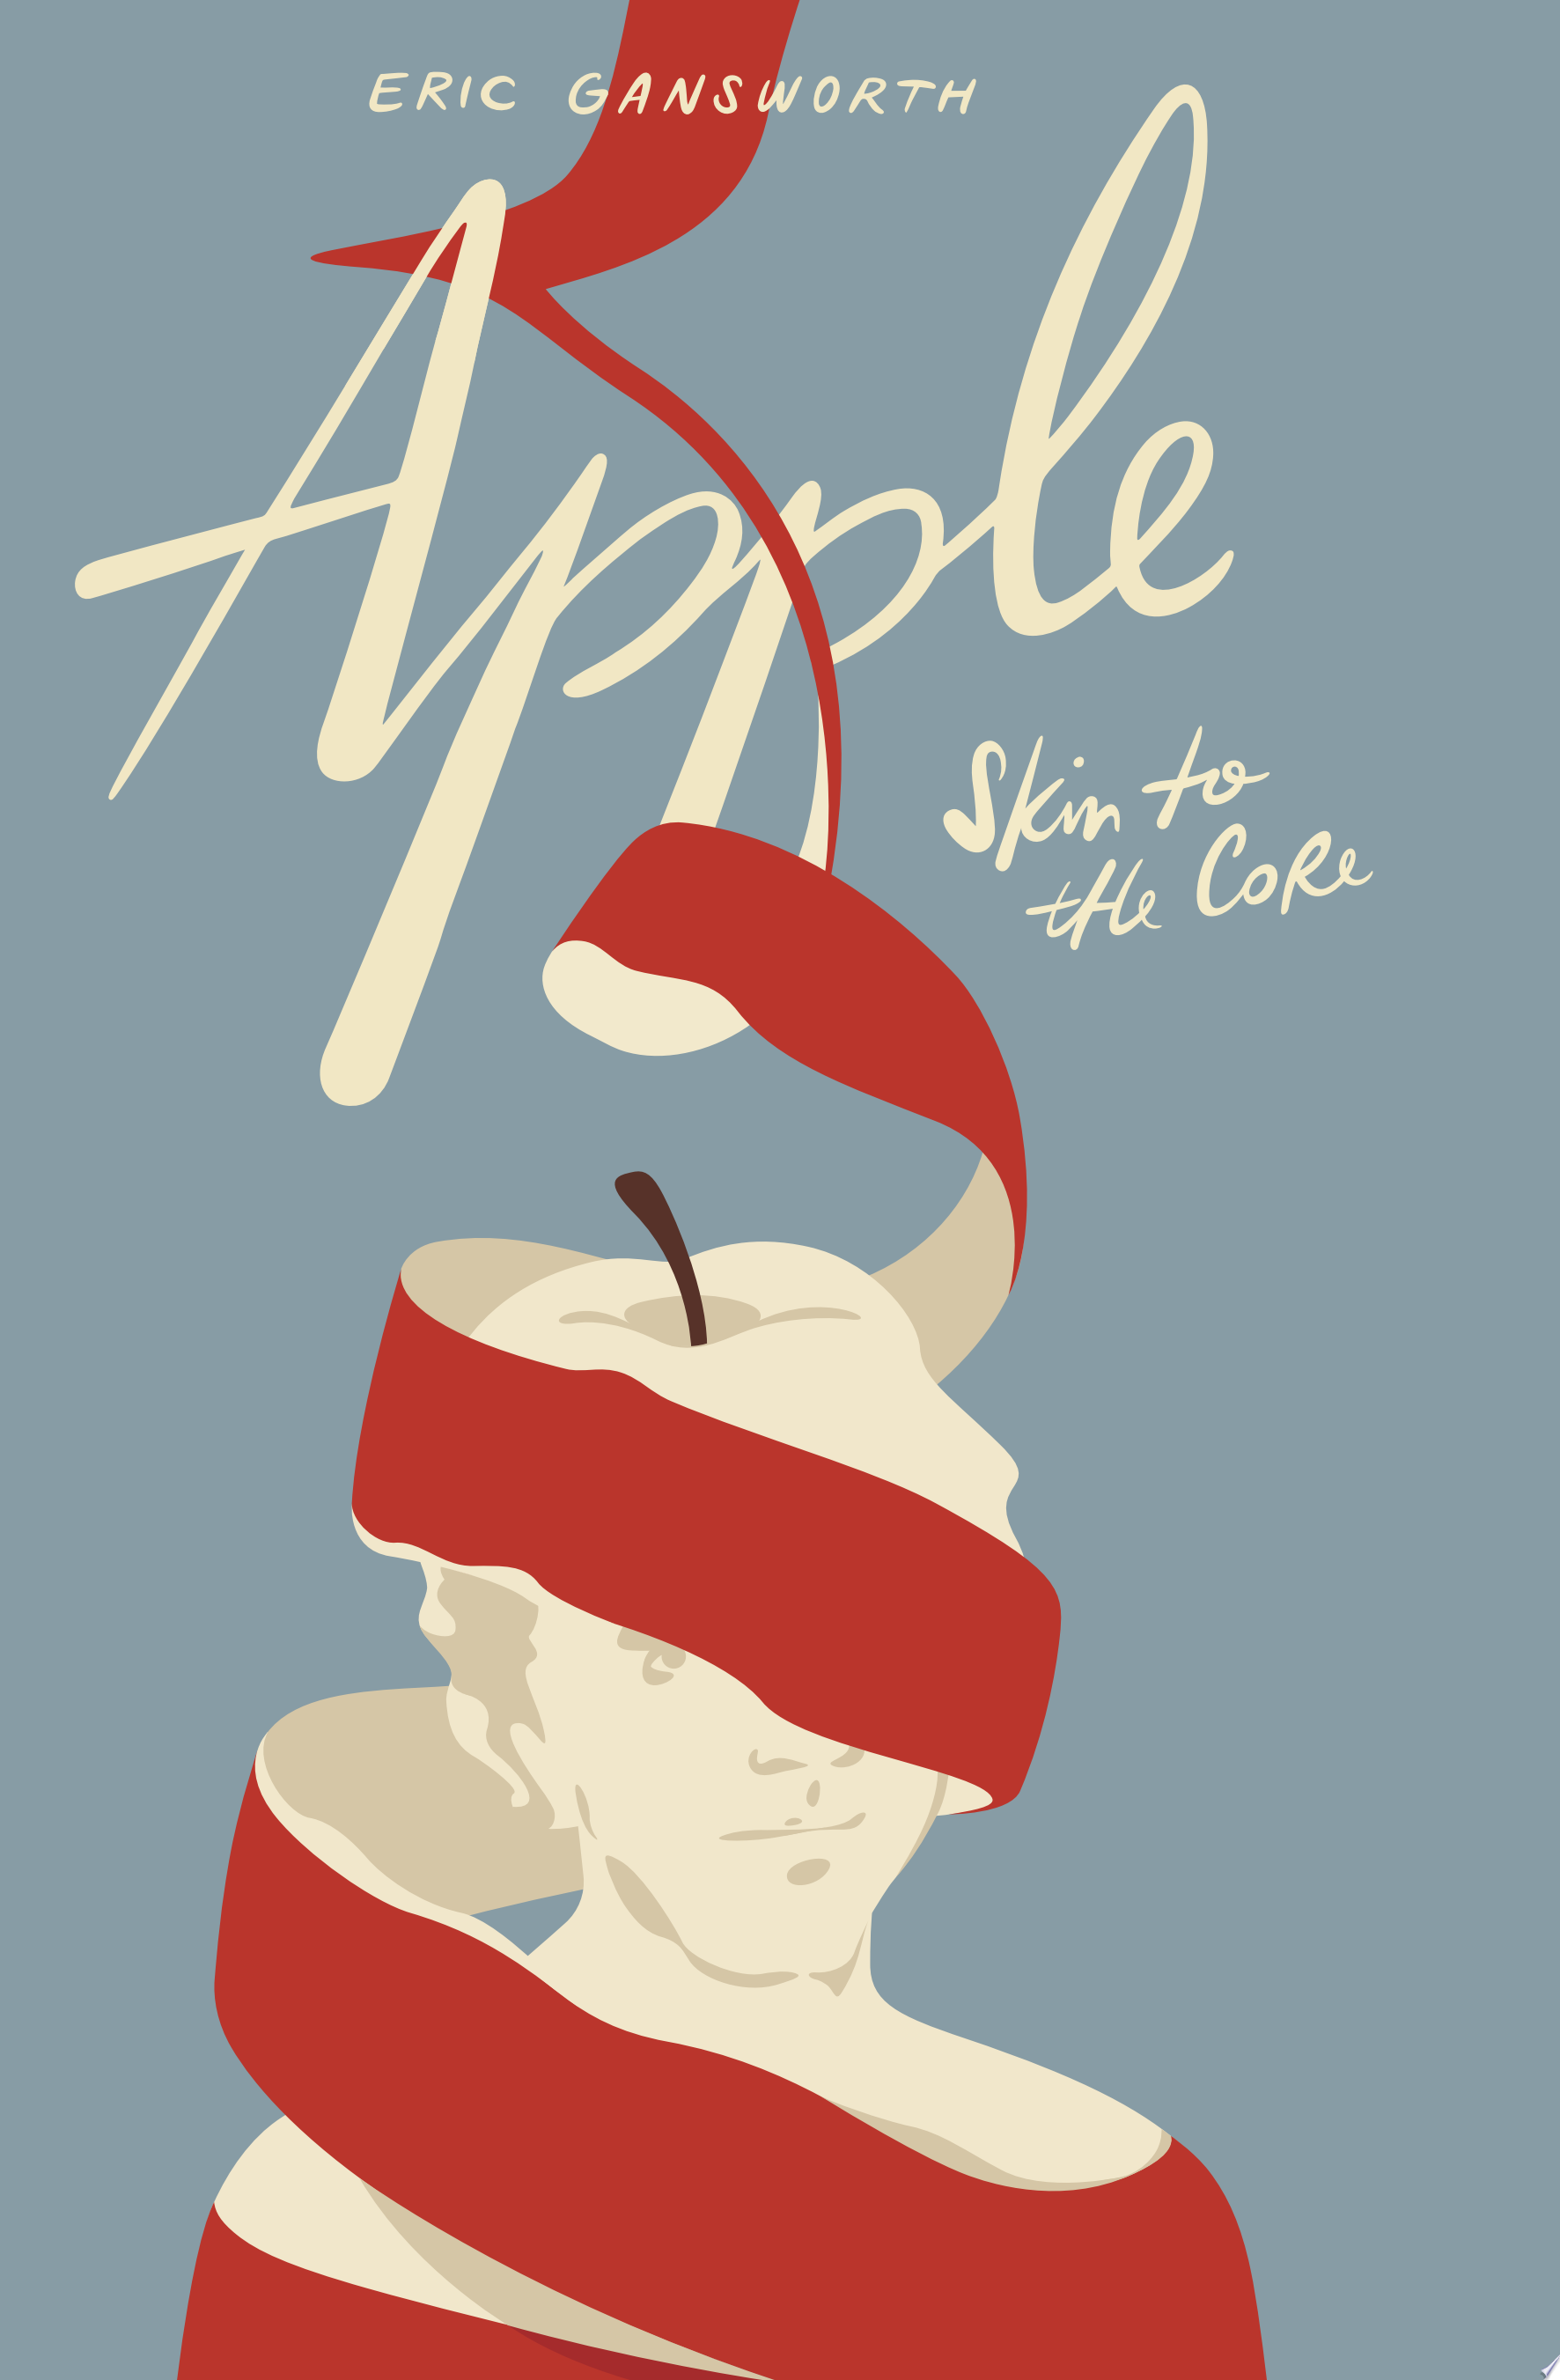 Image for "Apple"